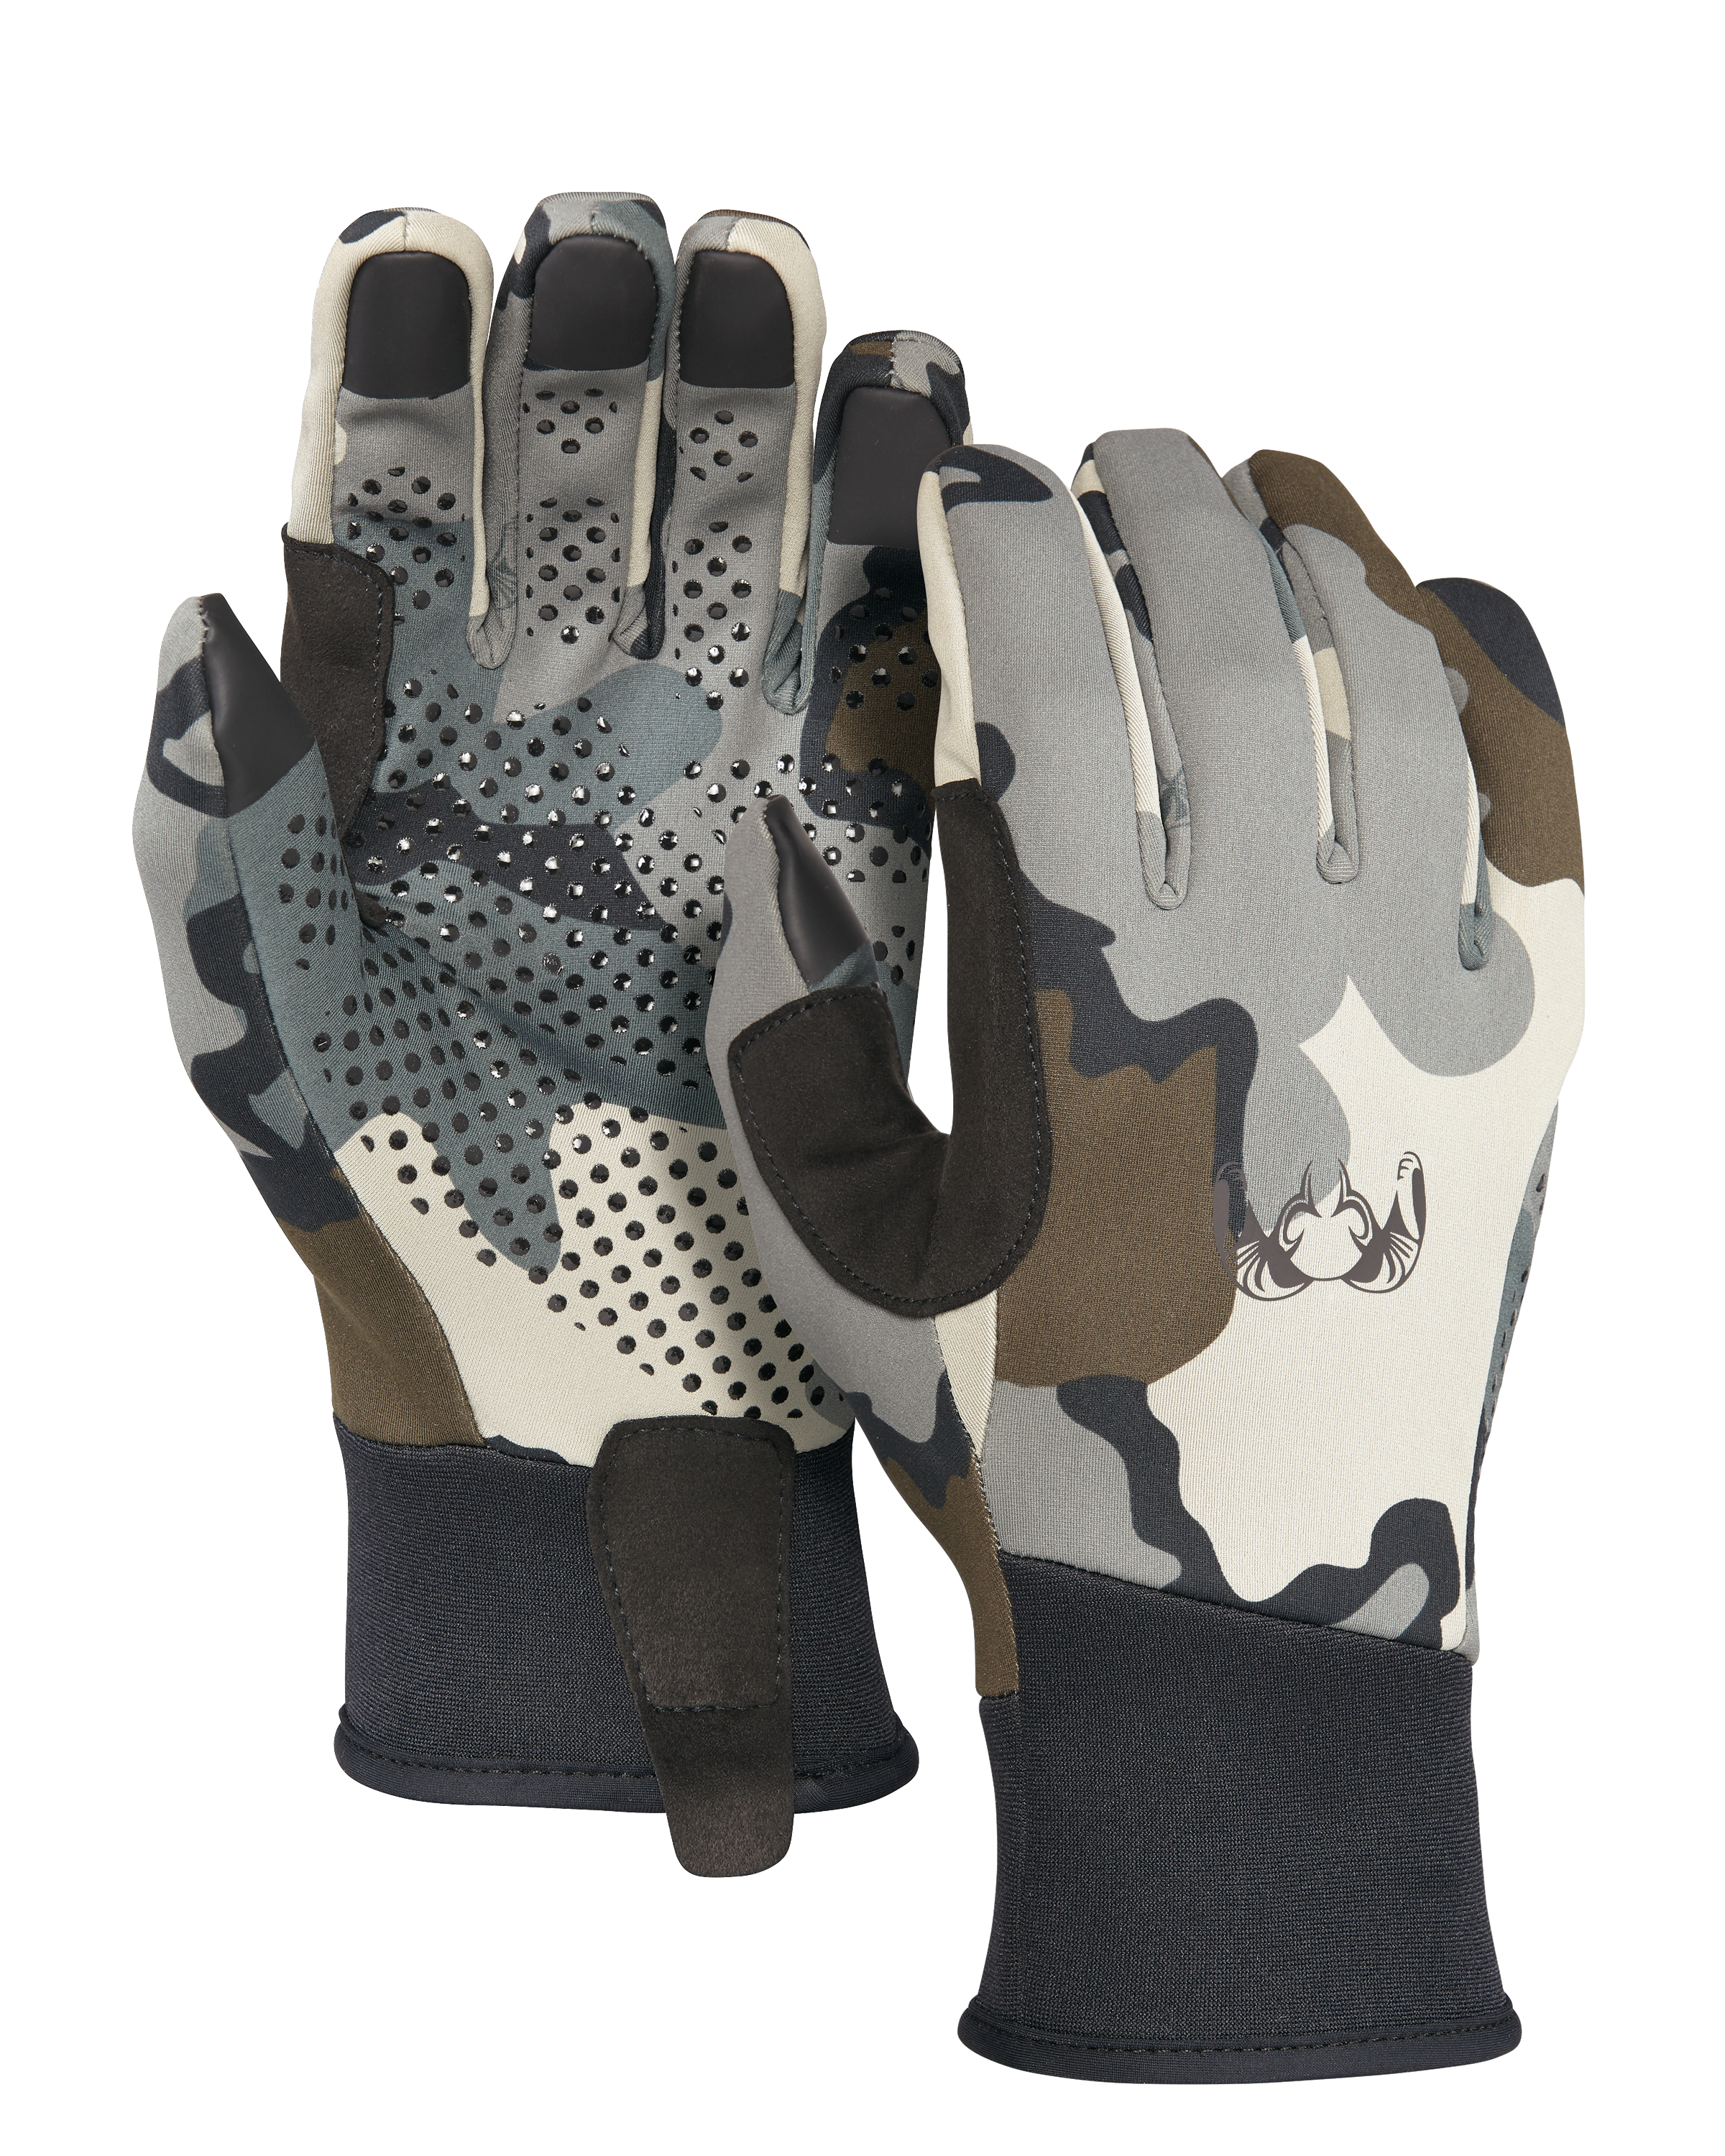 KUIU Axis Hunting Glove in Vias | Small